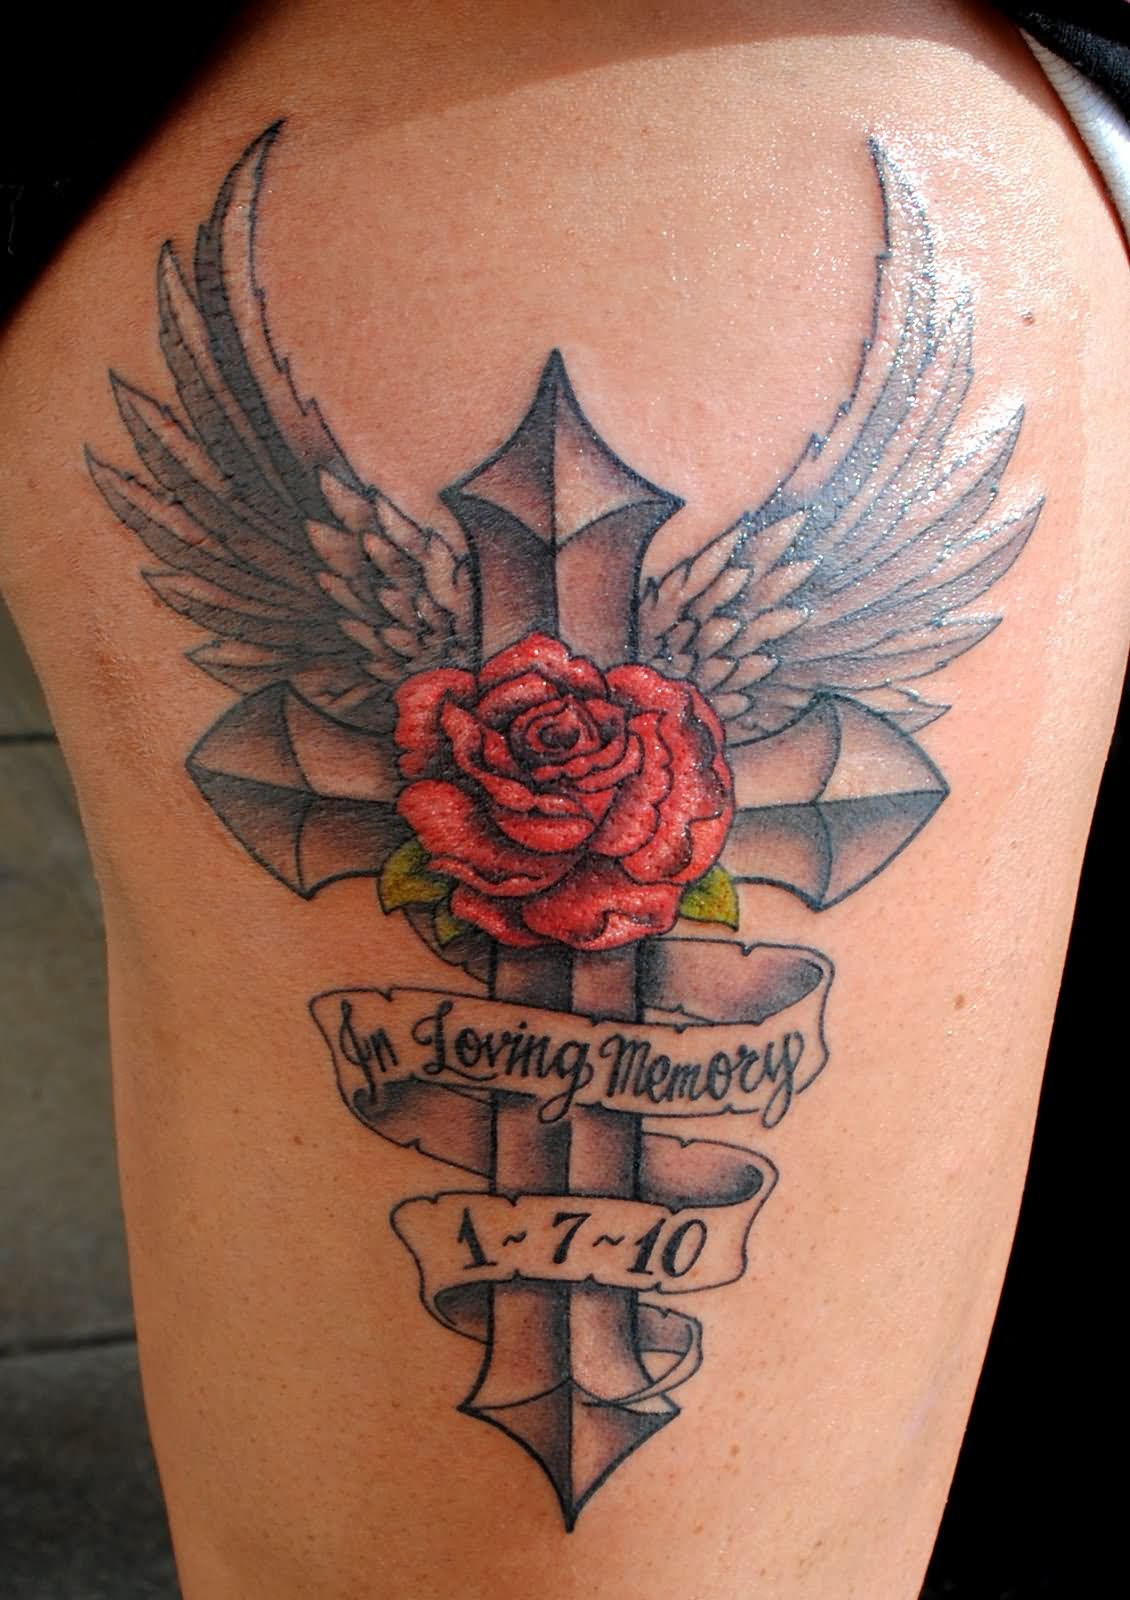 Red rose and banner In loving memory over Black cross with angel wings memorial tattoo on thigh